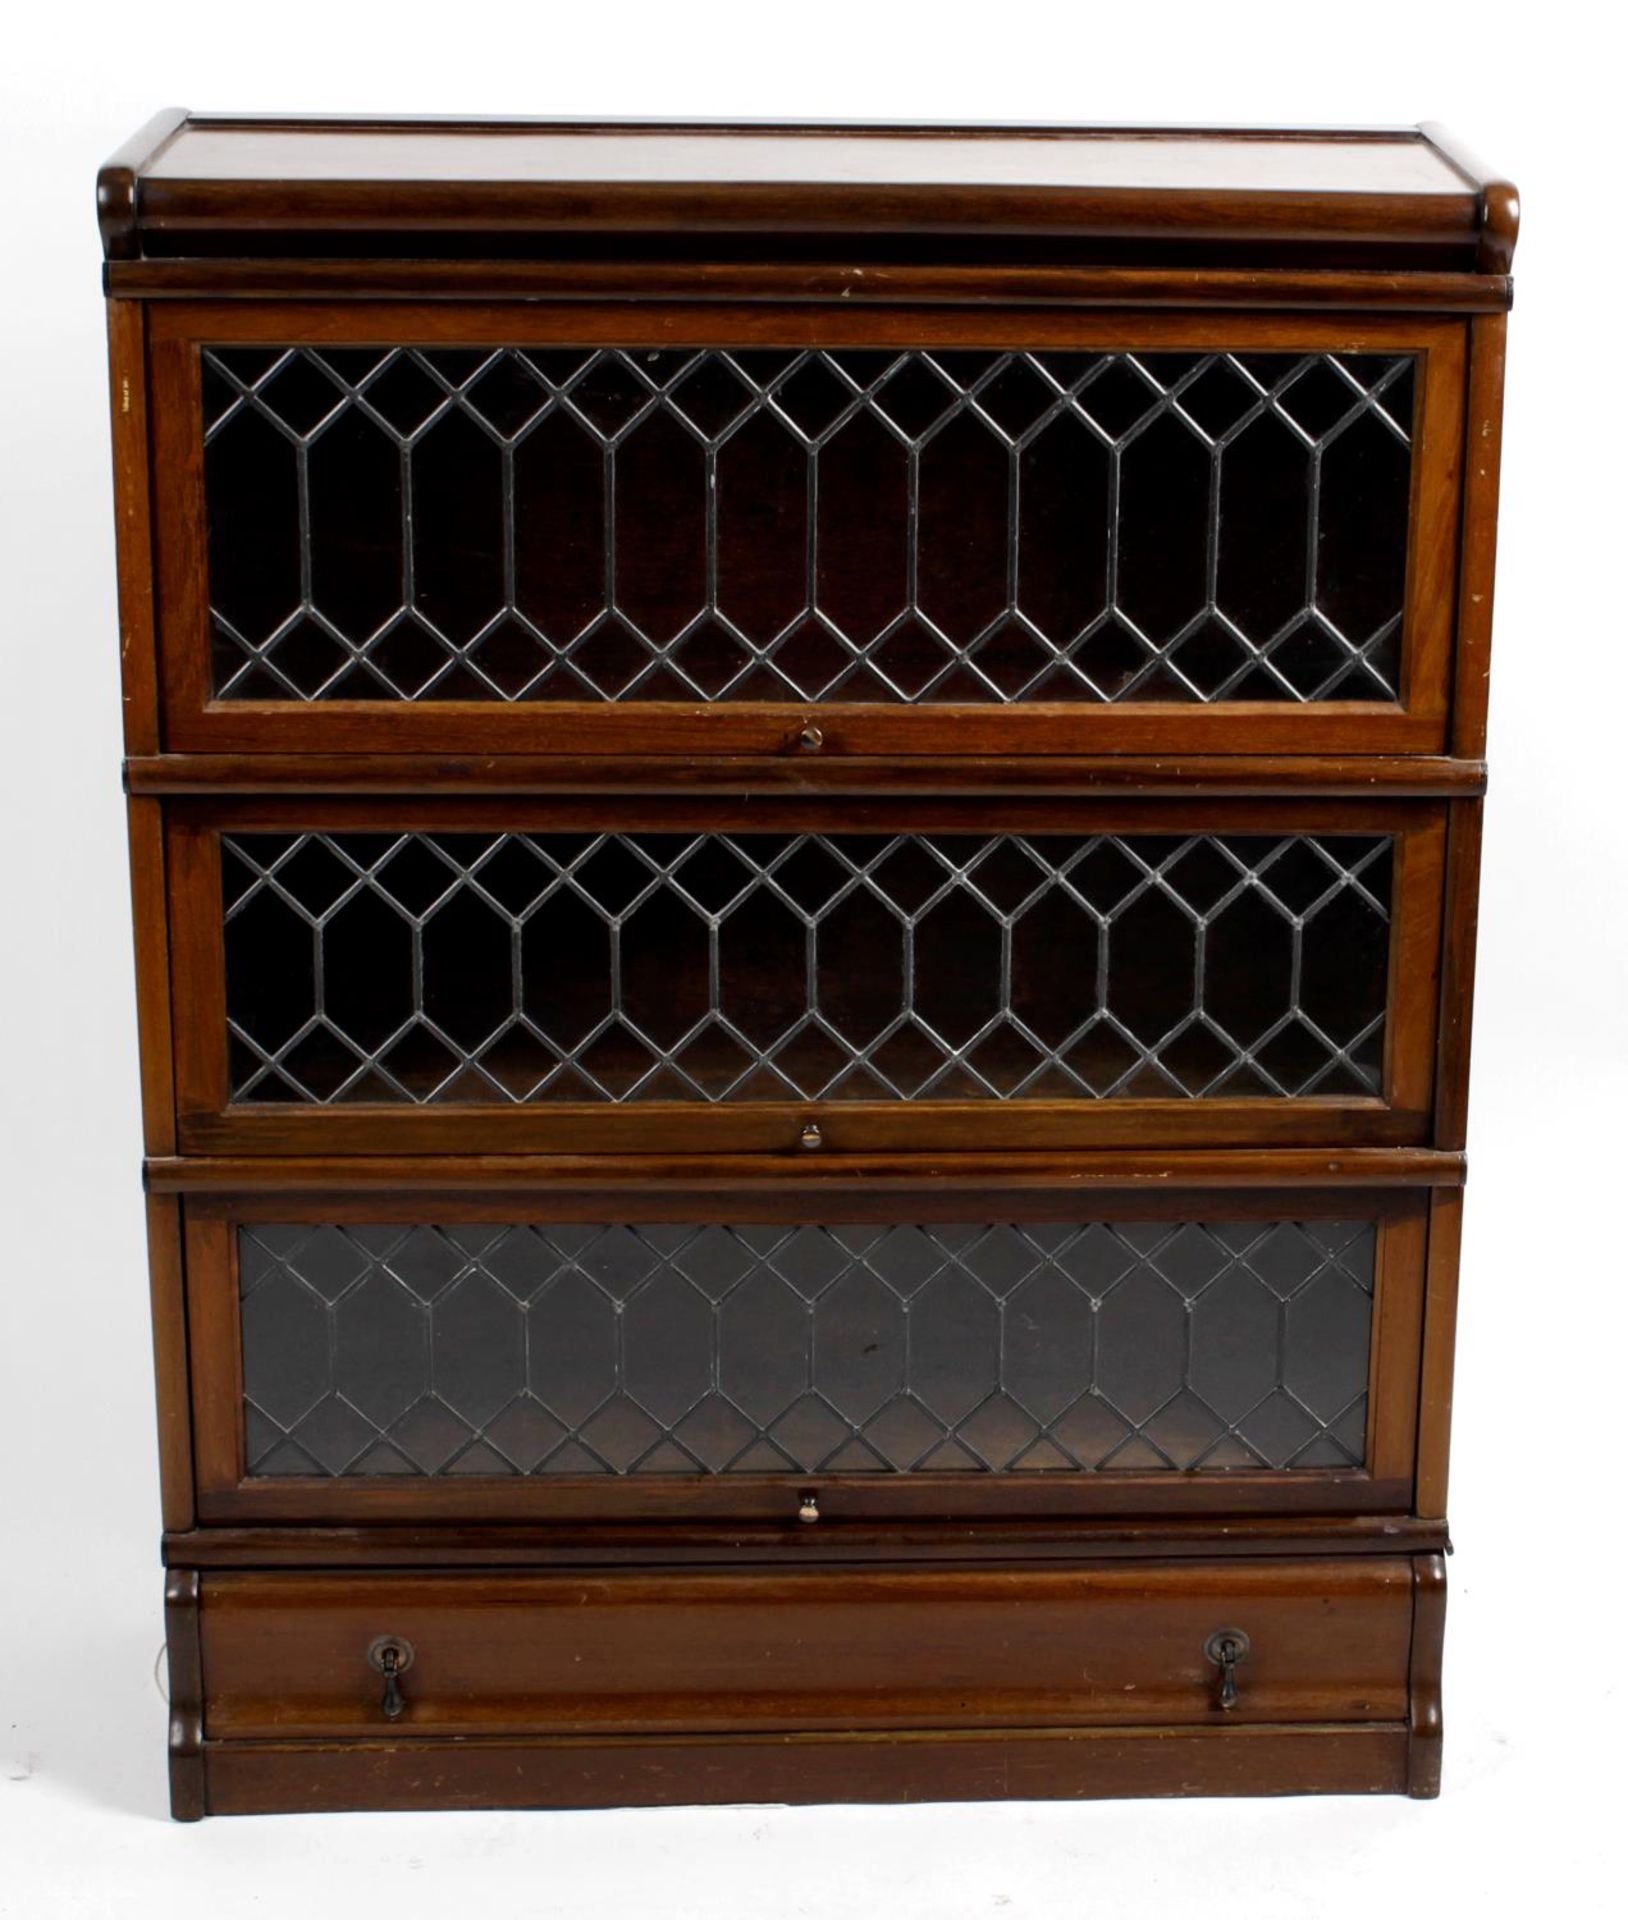 An early 20th century mahogany Globe Wernicke sectional stacking bookcase,